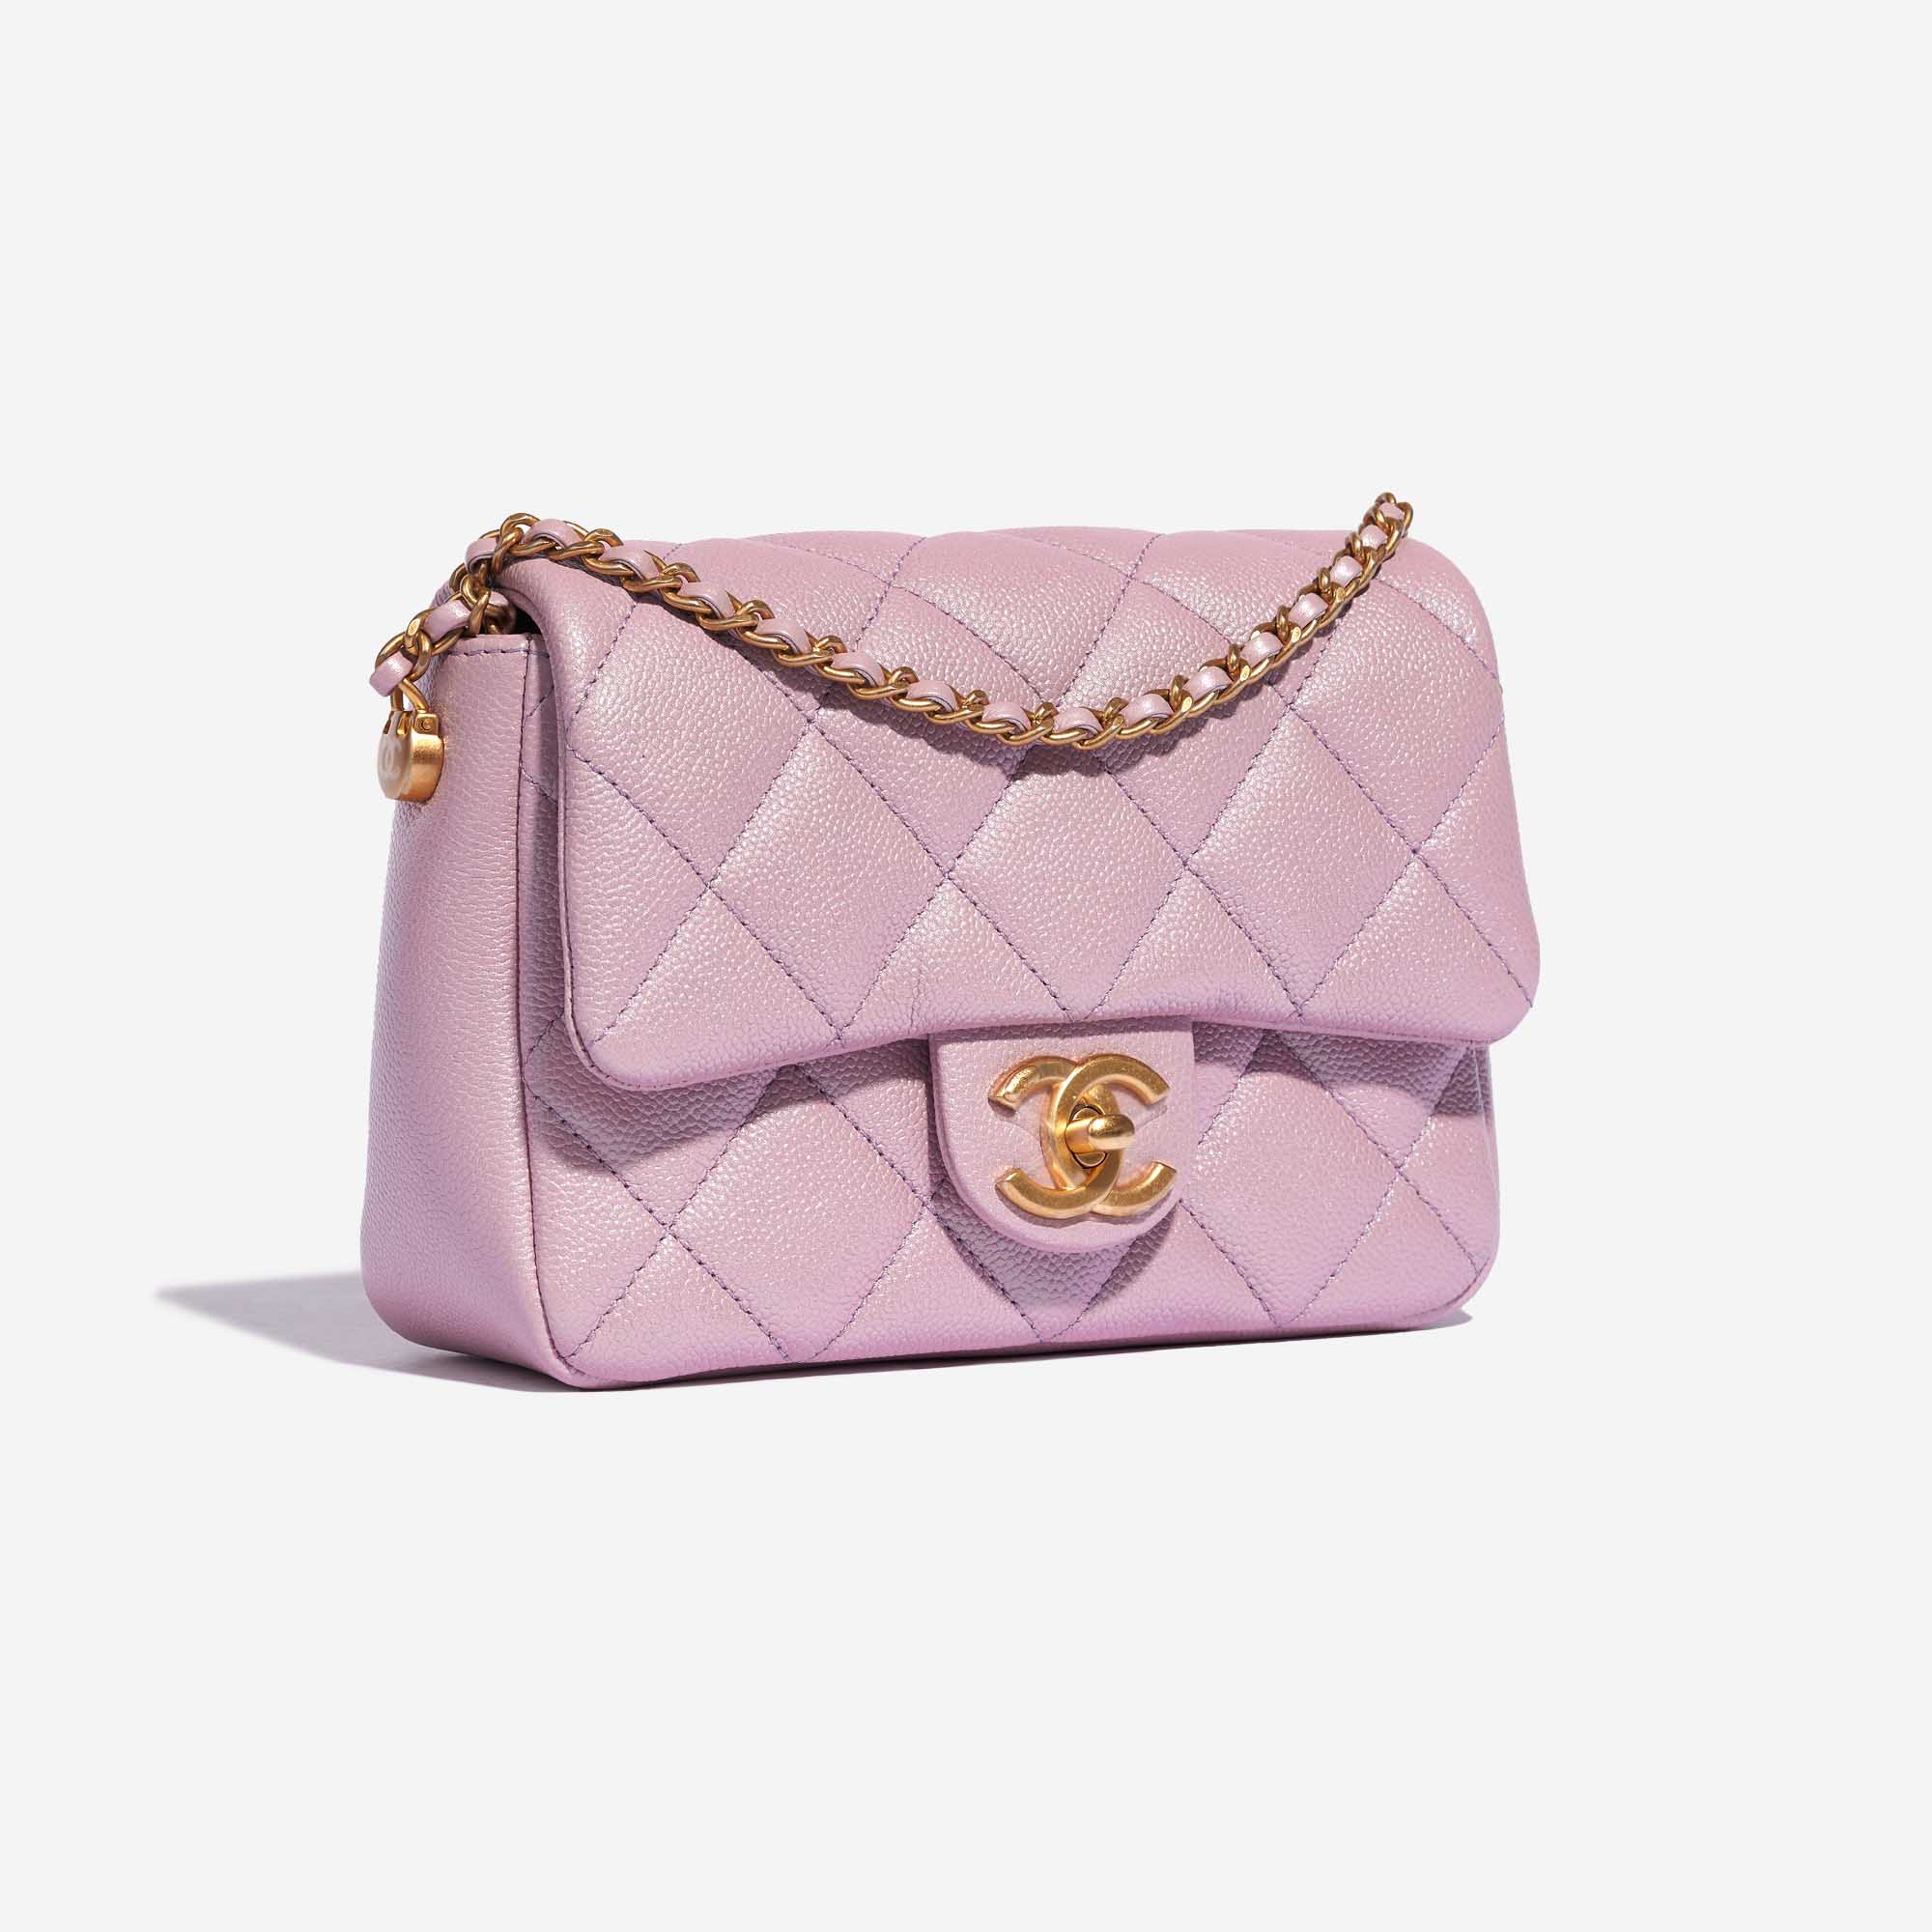 Chanel Timeless Small Caviar Violet